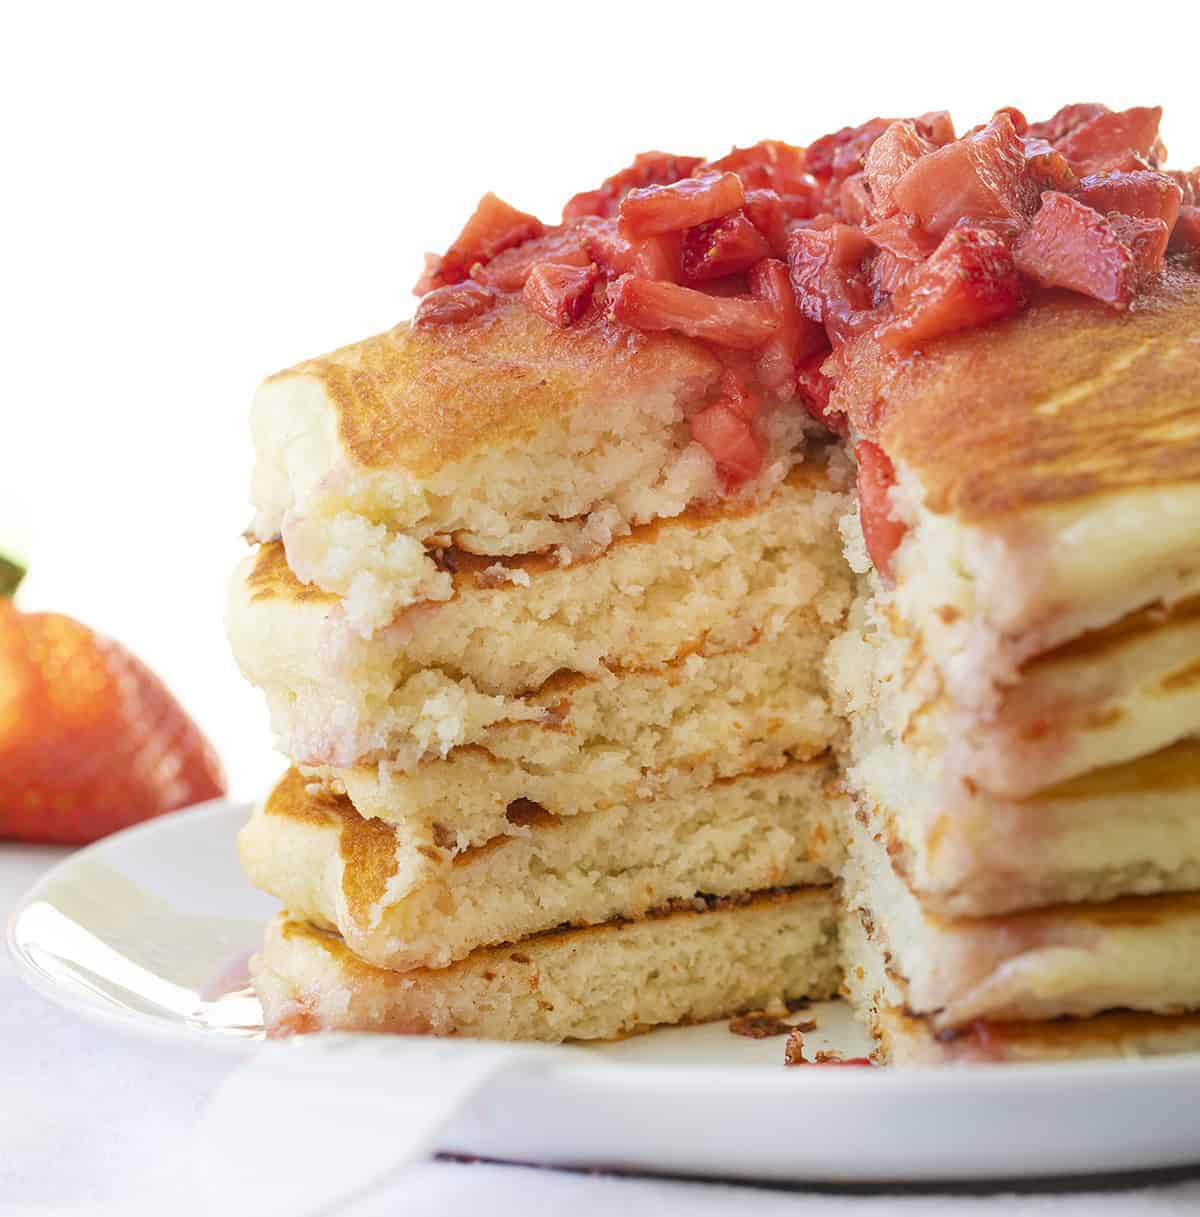 Strawberry Cheesecake Pancakes Cut Into Showing Inside